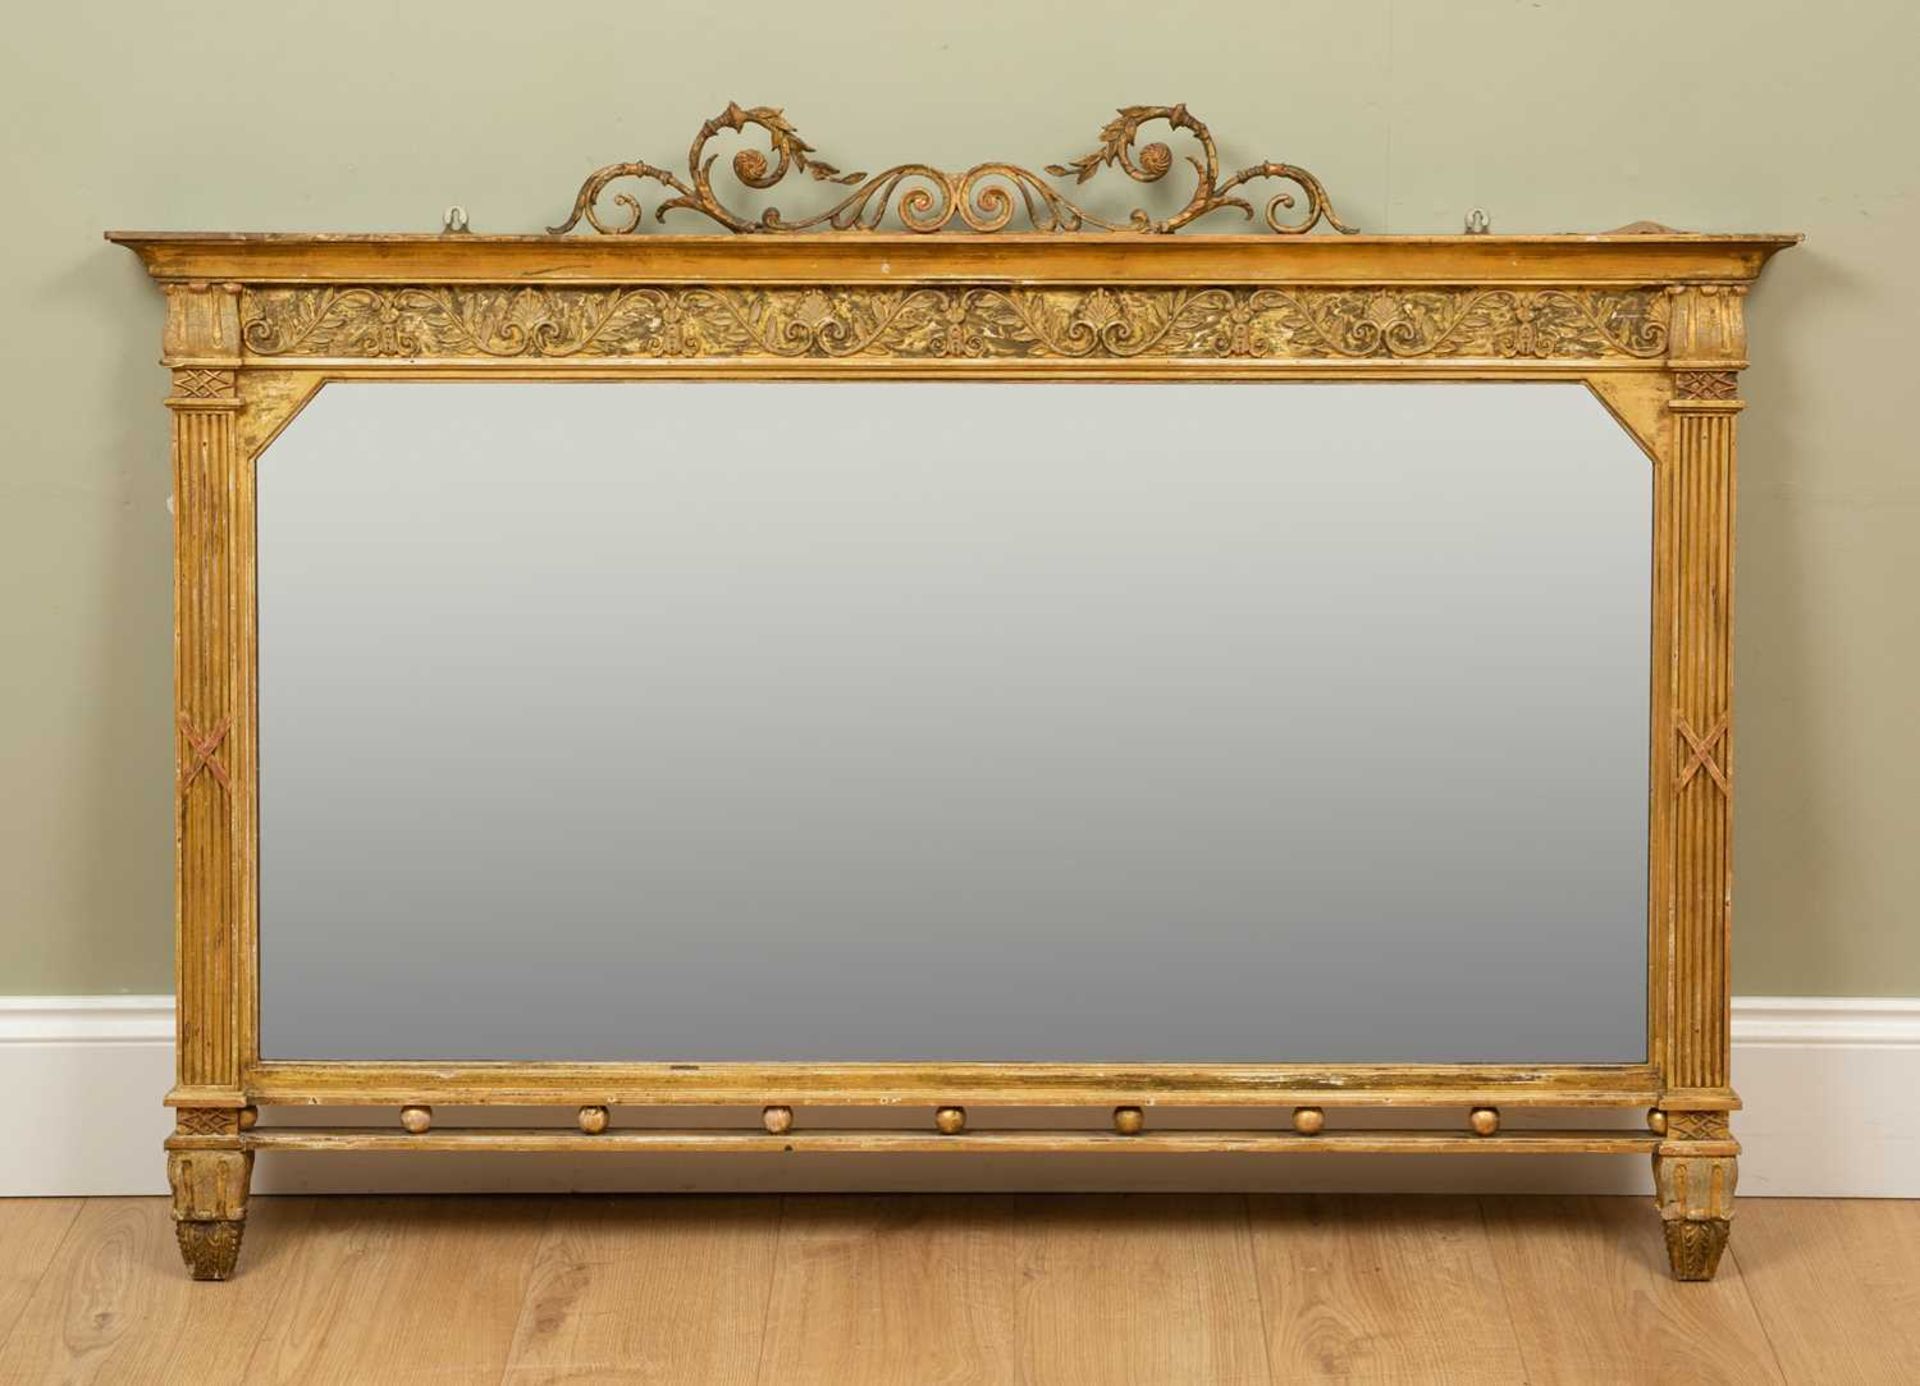 A 19th century gilt framed overmantle mirror, the scrolling crest above a frieze with classical